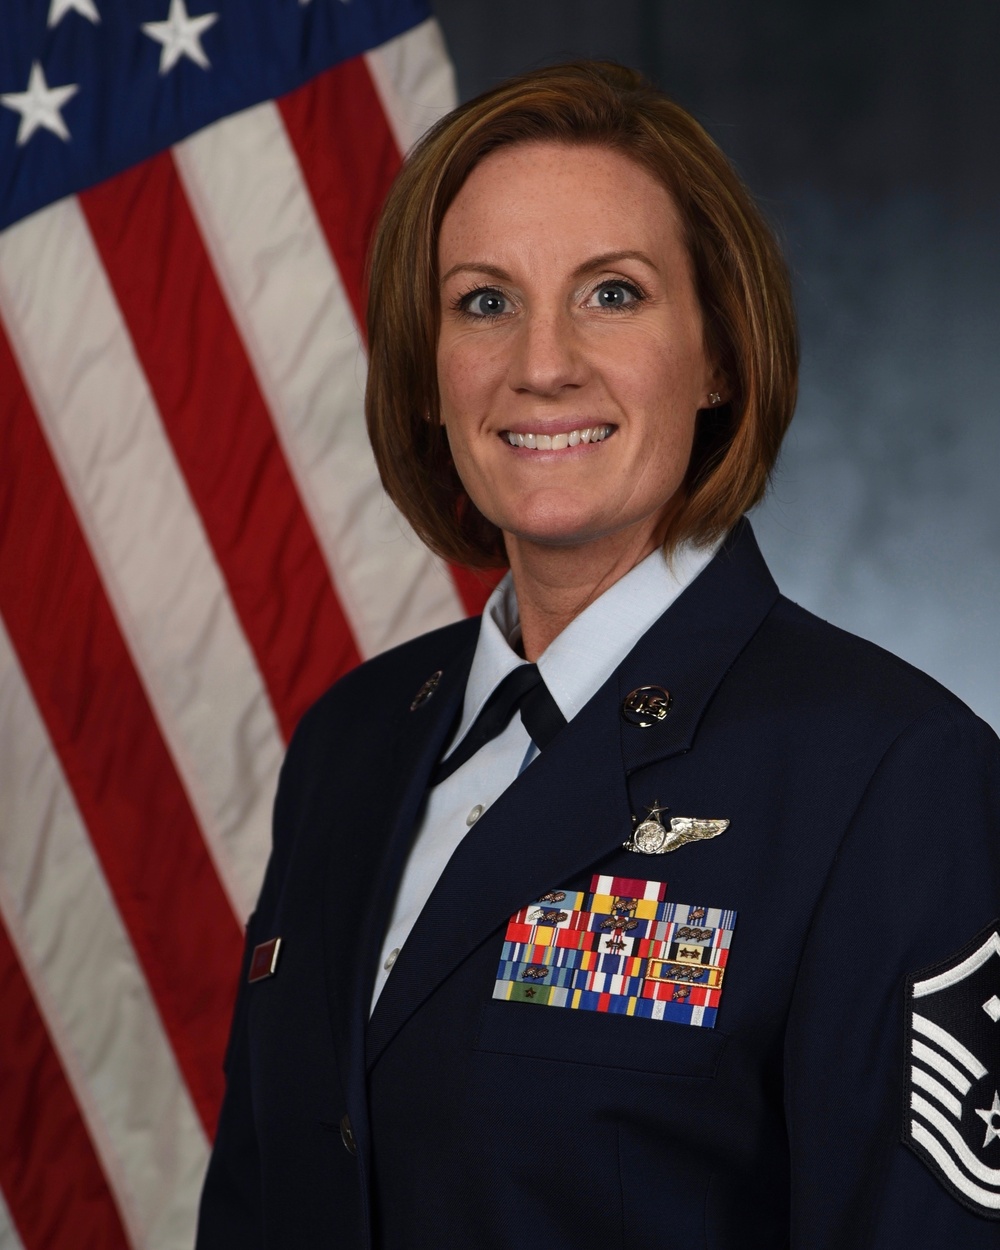 Master Sgt. Tricia Shivers